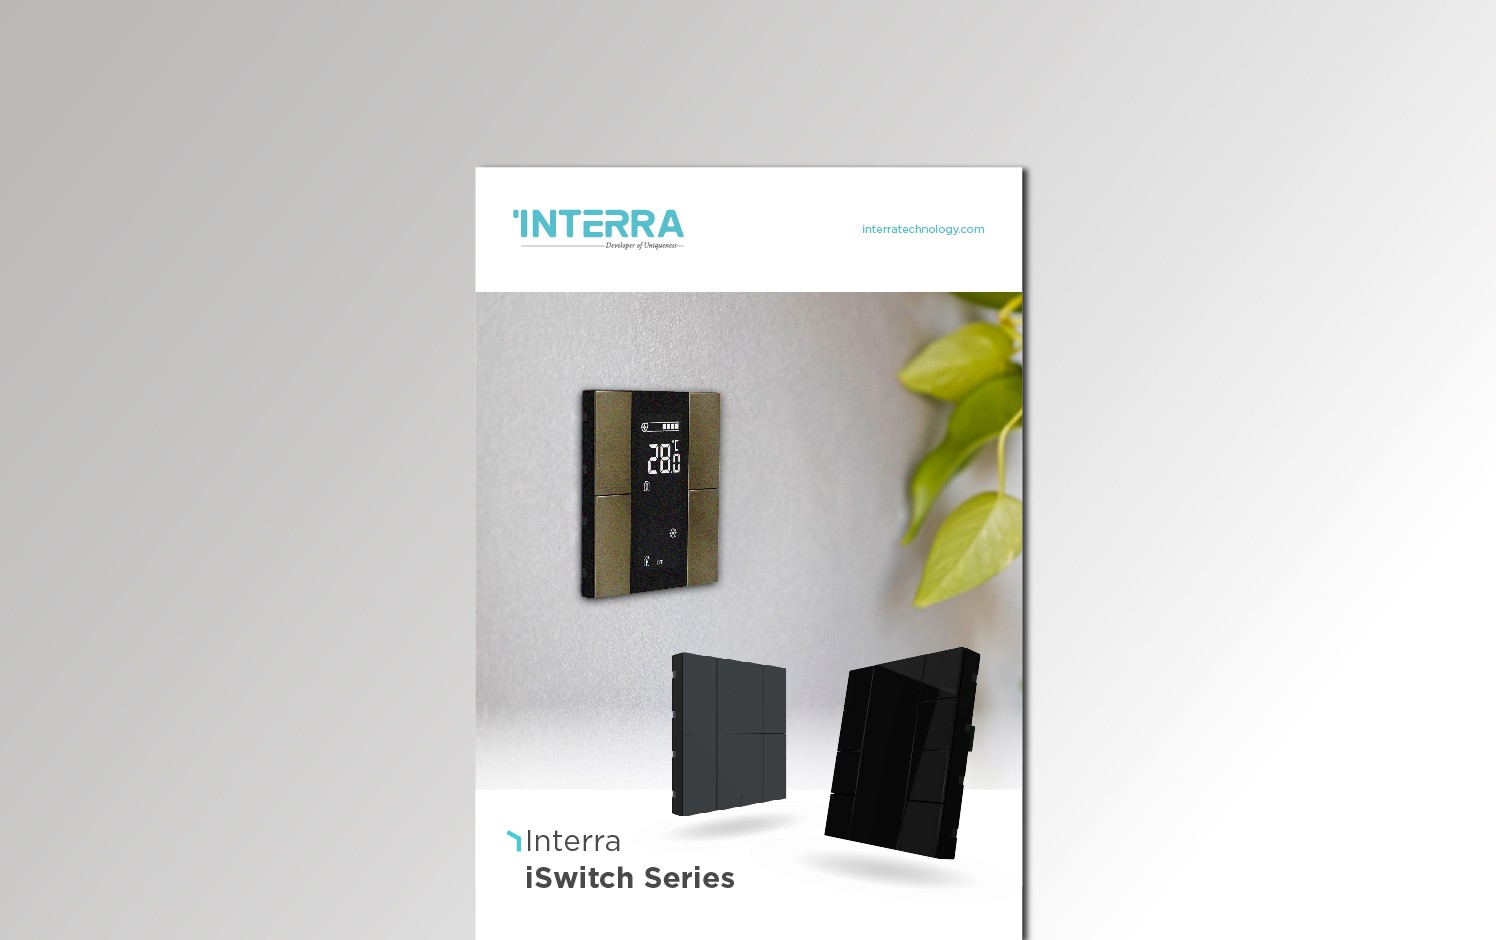 Interra iSwitch Series